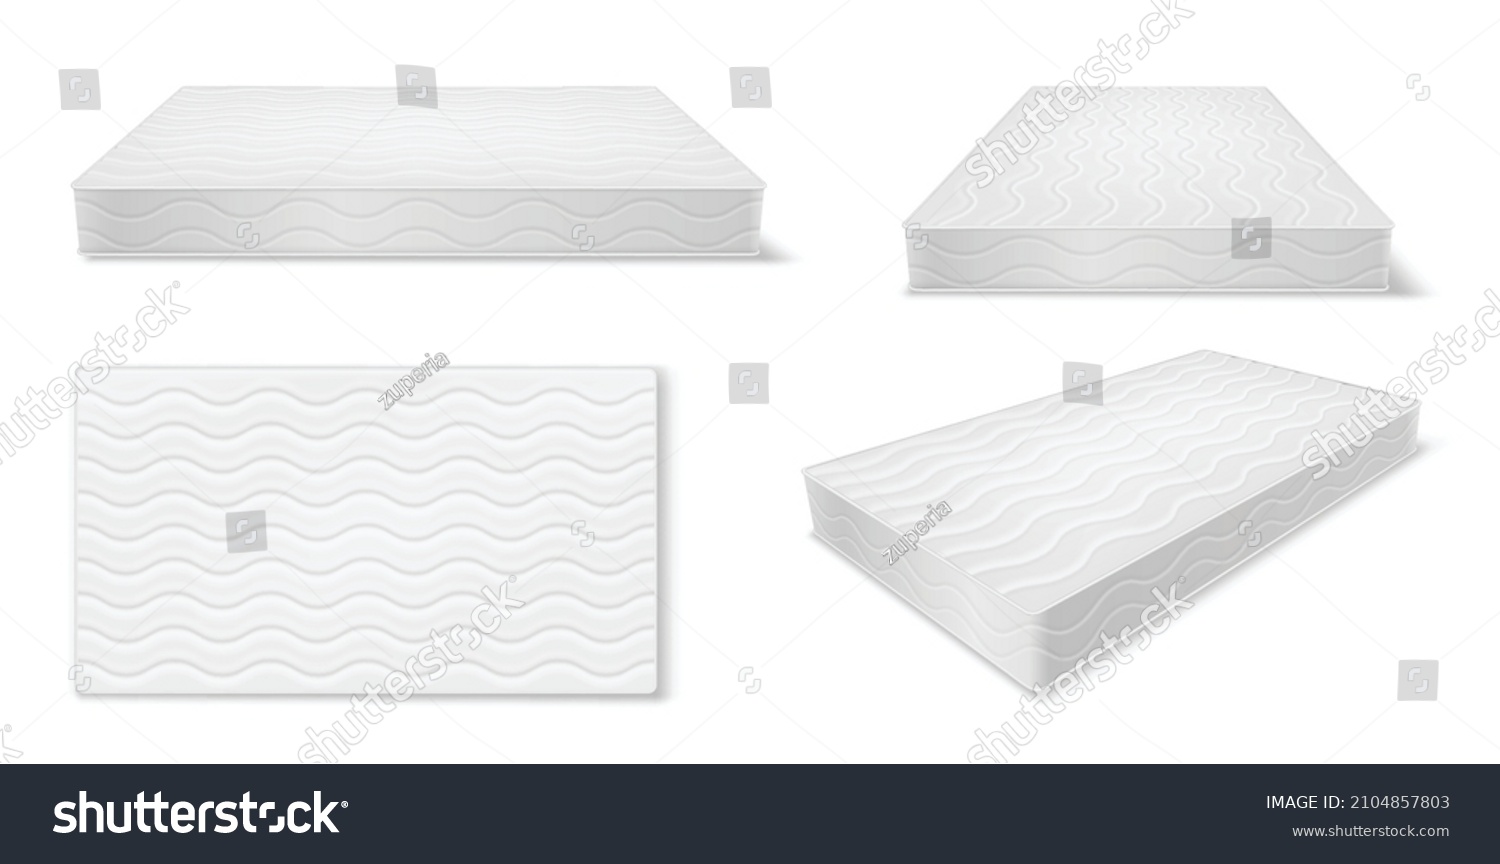 SVG of Mattress, futon or flock bed realistic mockups set. Top, side, three quarter view. Large pad for supporting body, sleeping, rest, relaxation on bed, sofa or couch. Vector illustration svg